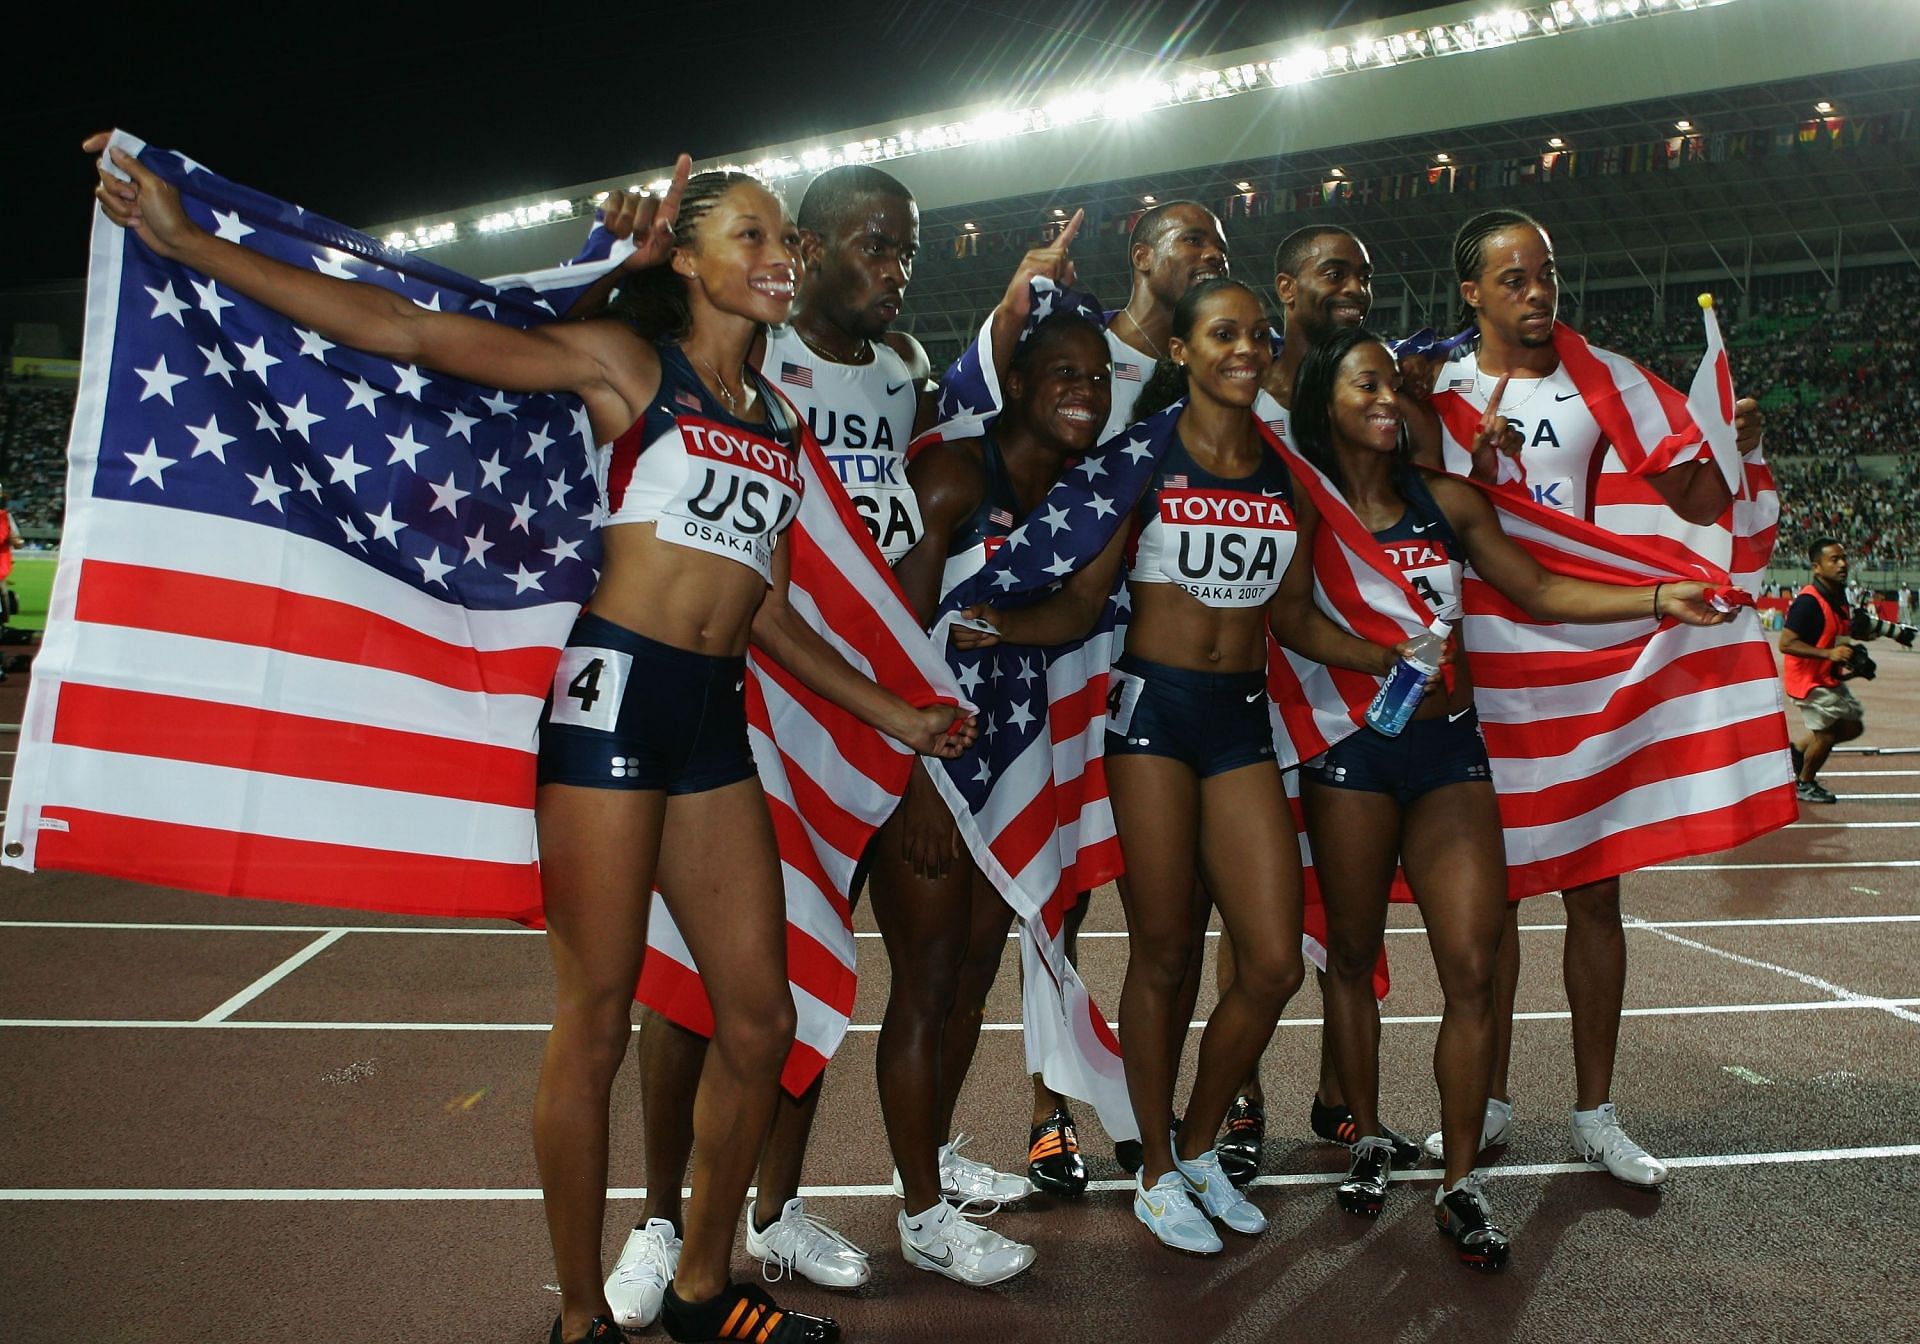 Allyson Felix, Leroy Dixon, Lauryn Williams, Darvis Patton, Torri Edwards, Tyson Gay, Mikele Barber, and Wallace Spearman celebrate after winning the men&#039;s and women&#039;s 4x100m relay at the 2007 IAAF World Athletics Championships in Osaka, Japan